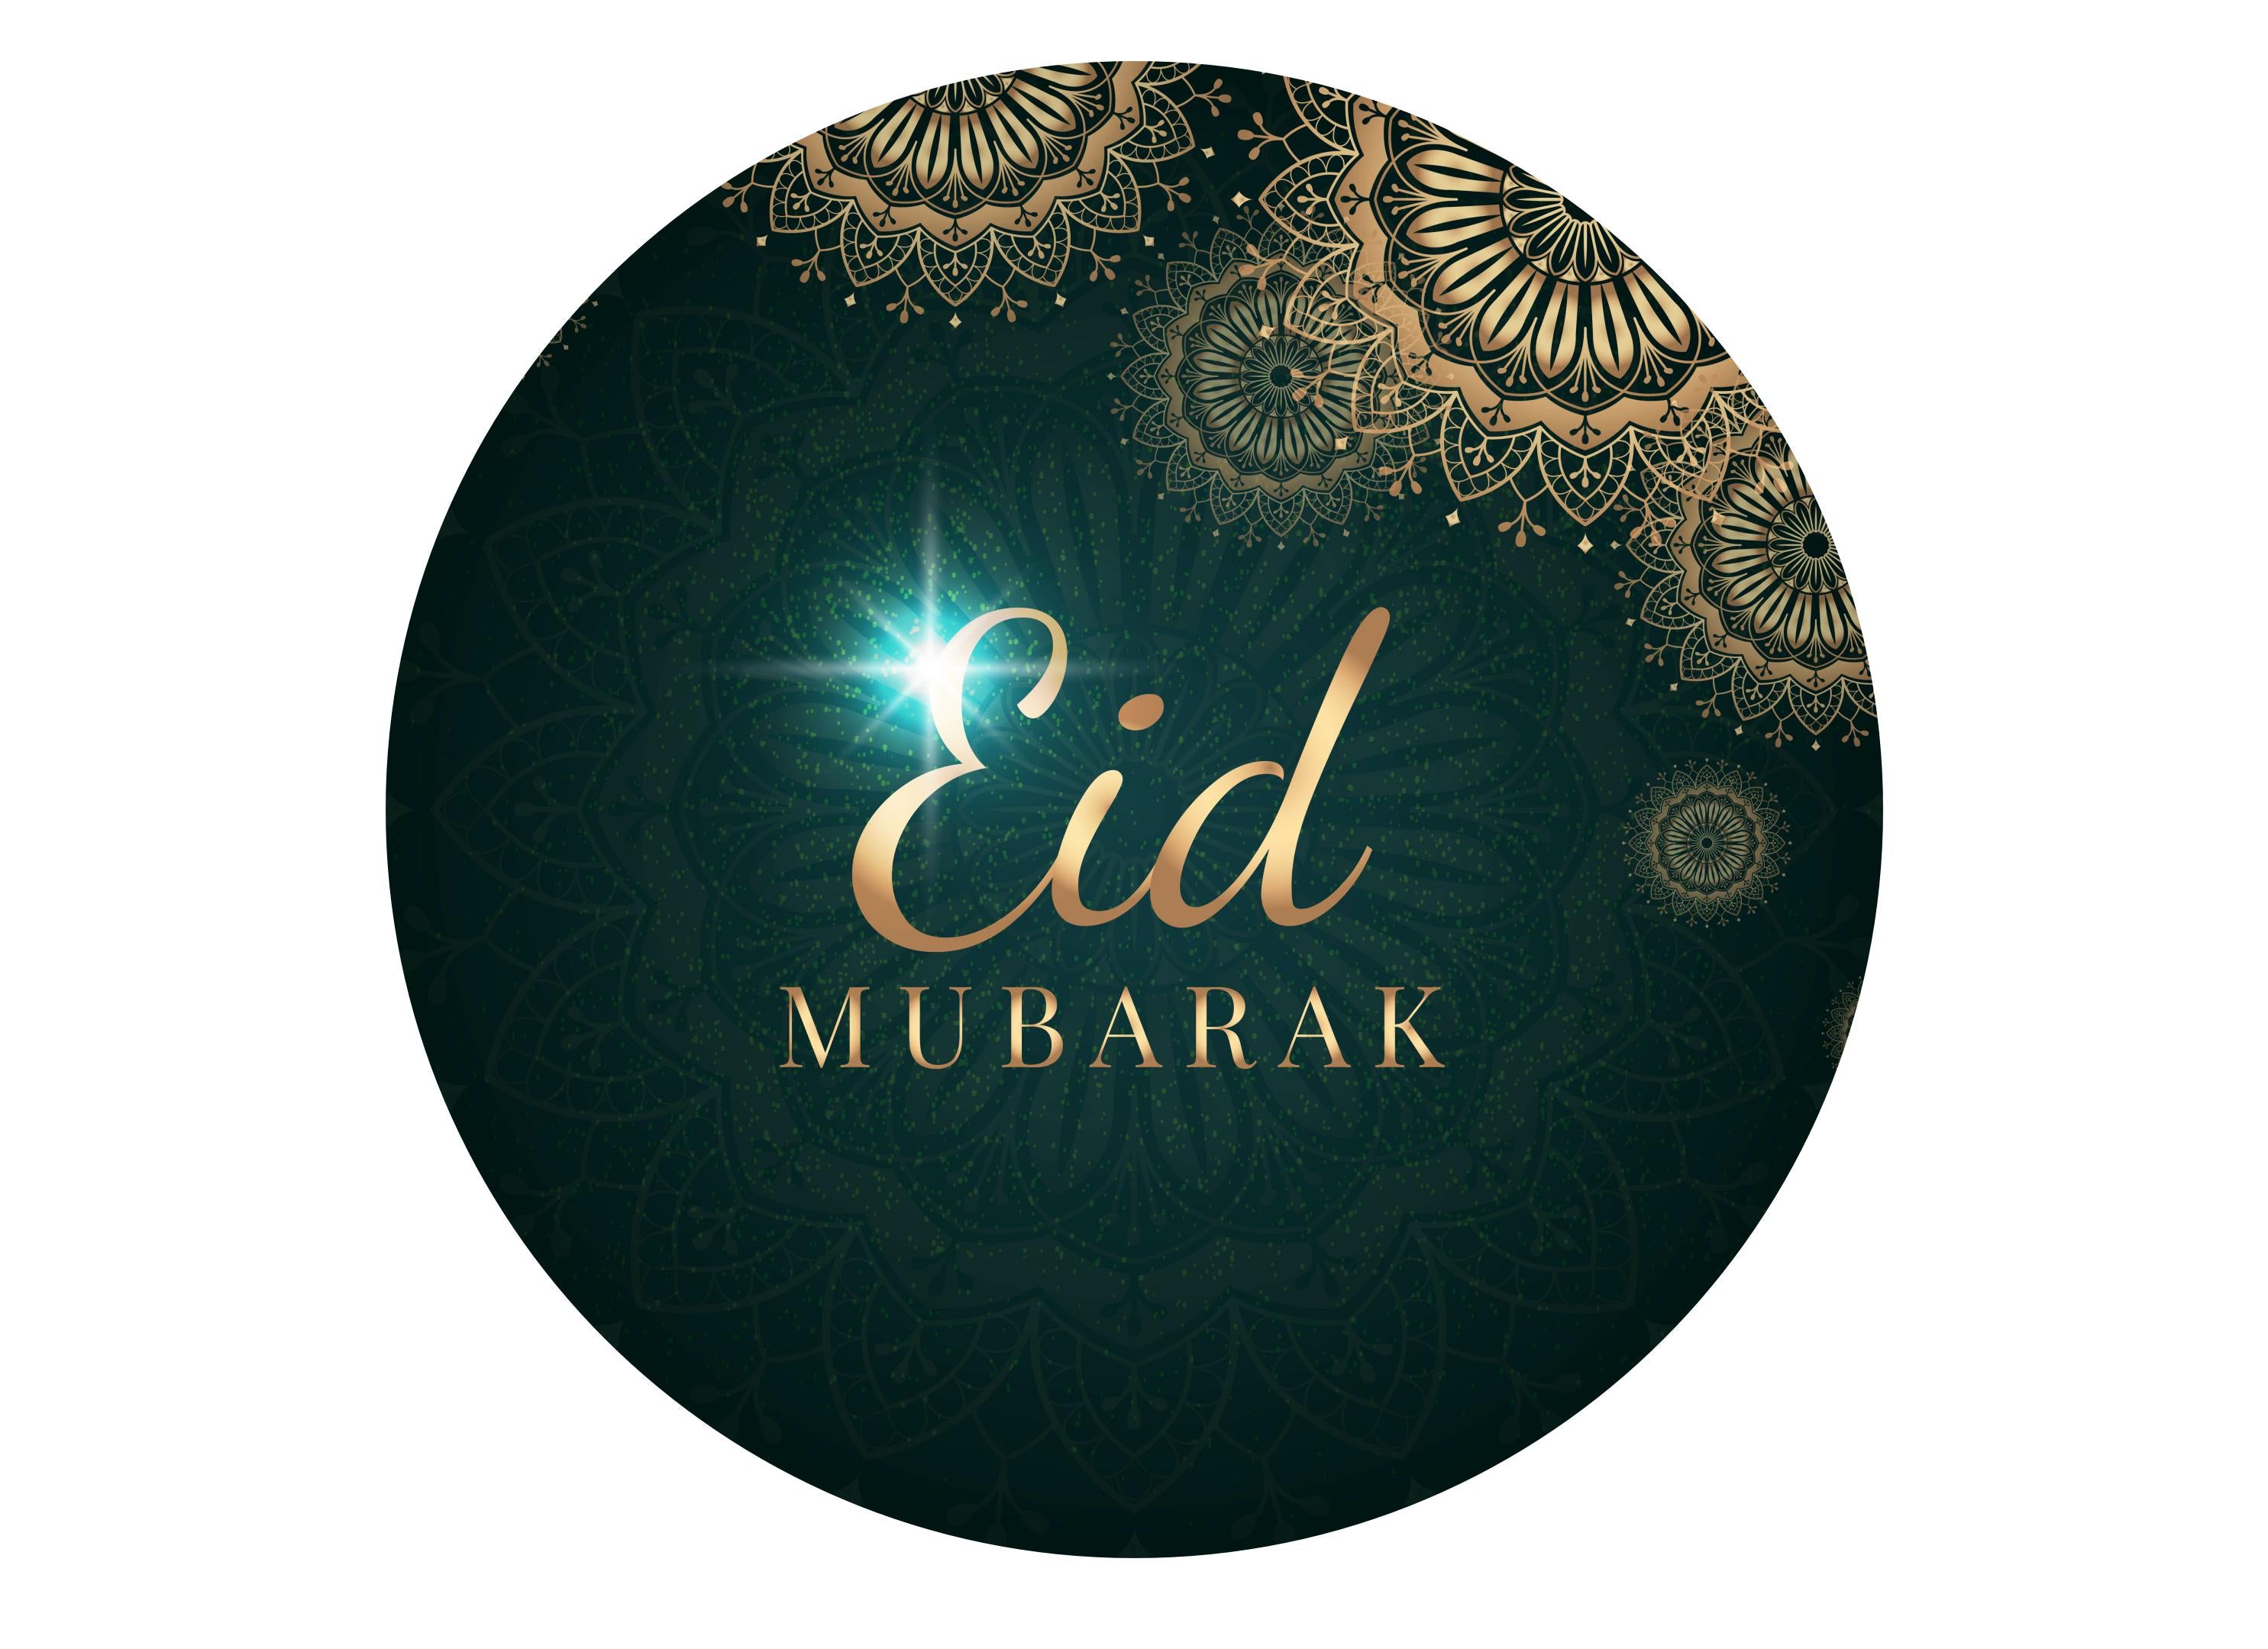 Large round cake topper with a green Eid Mubarak design